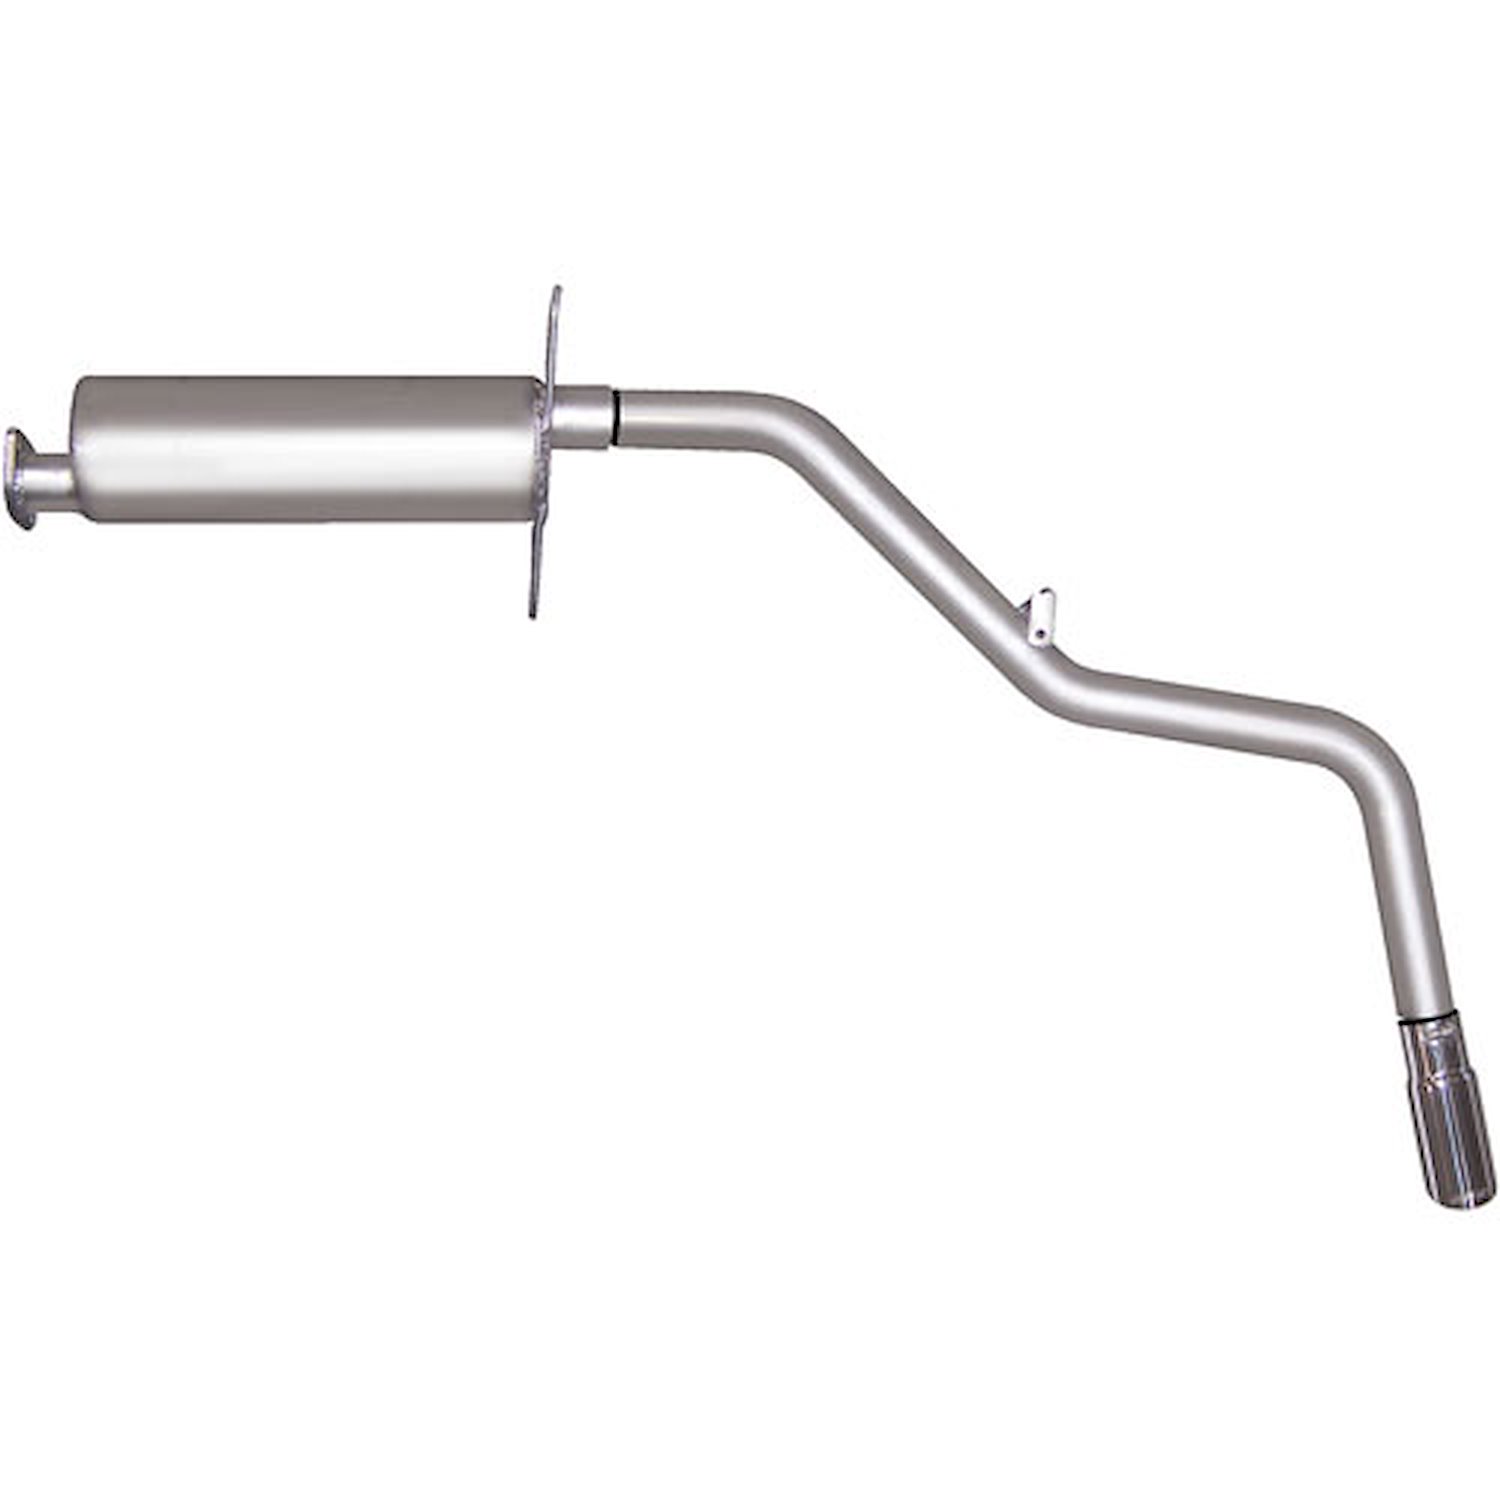 Swept-Side Cat-Back Exhaust 1998-00 for Nissan Frontier 2.4L